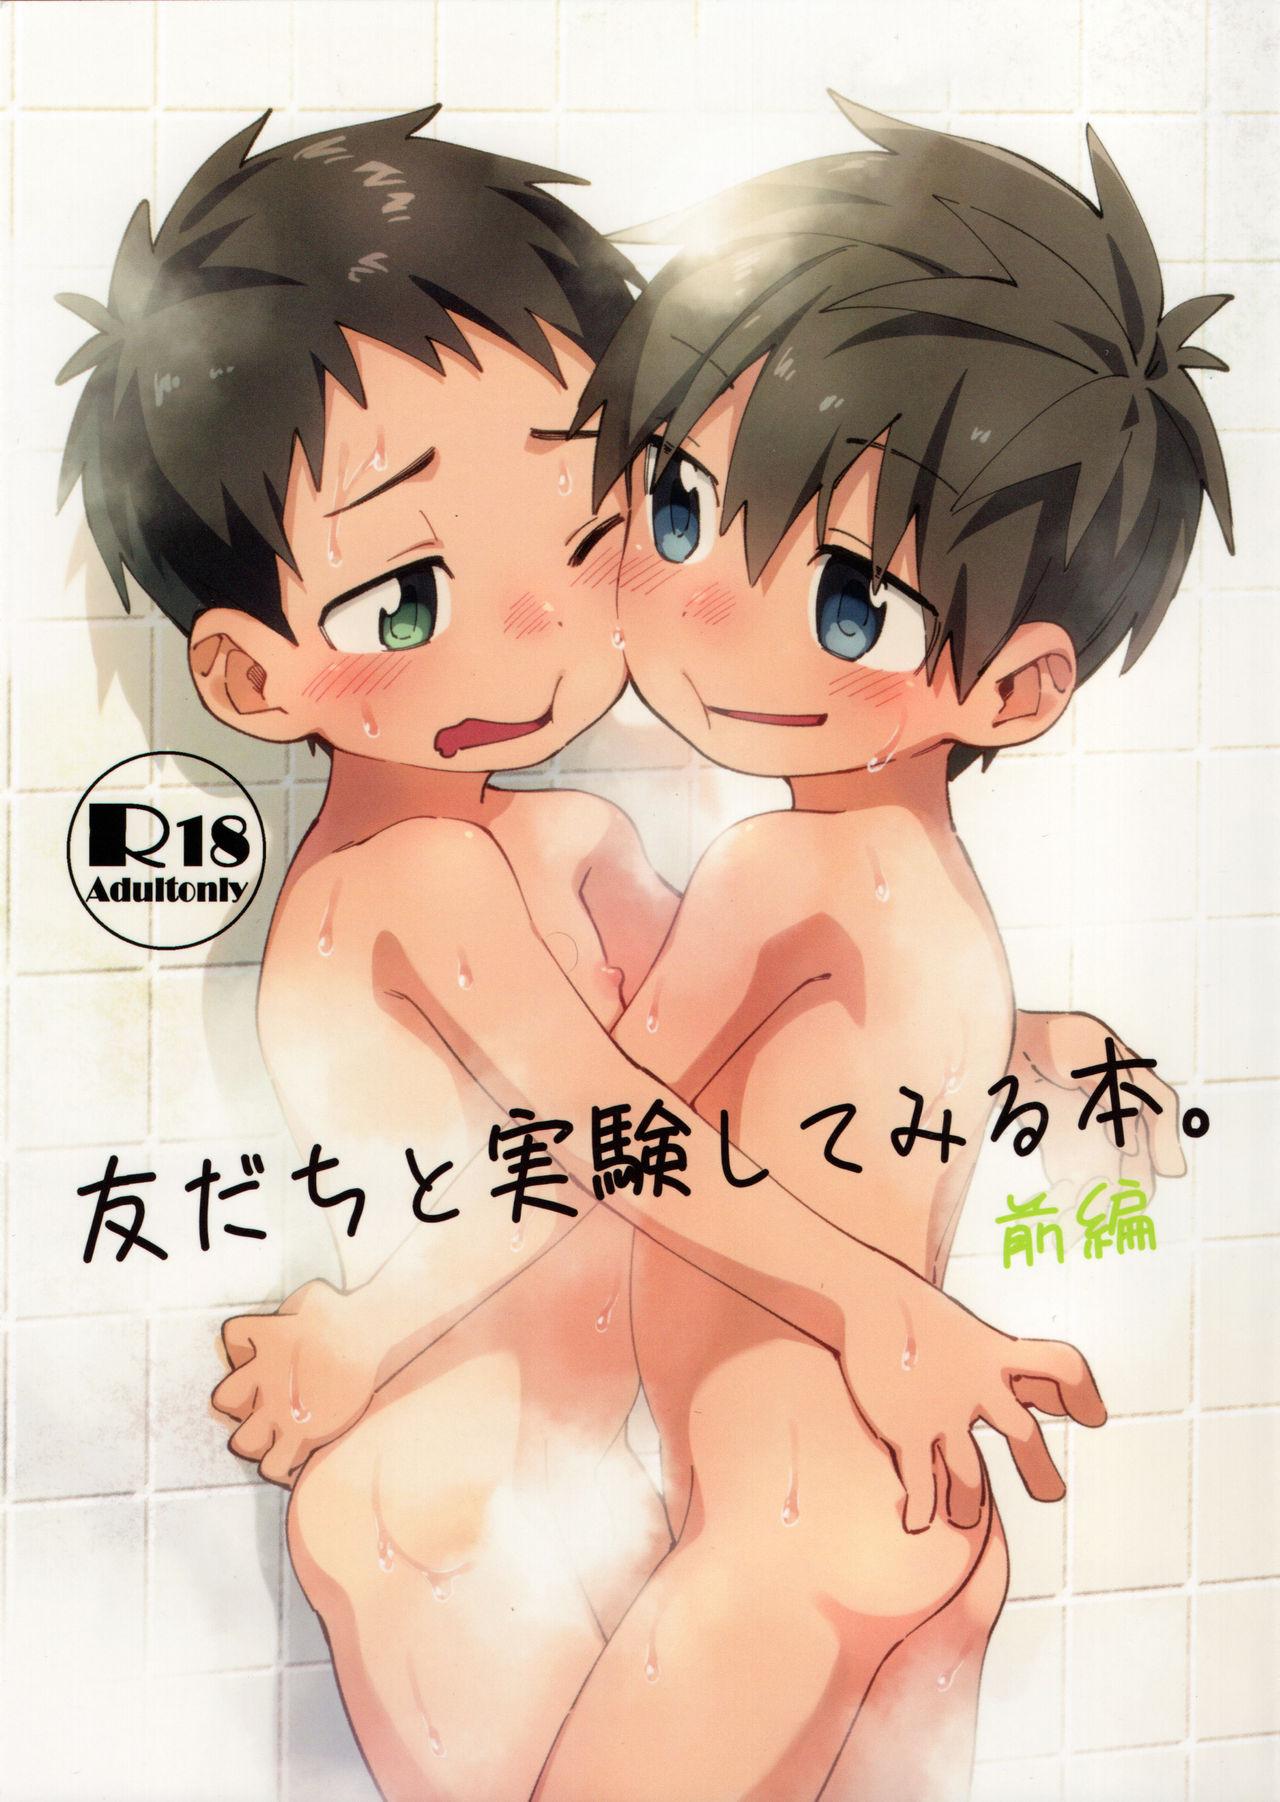 Gay Bang Tomodachi to Jikken Shite Miru Hon. Zenpen | A book about experimenting with your friend, part one - Original Topless - Picture 1